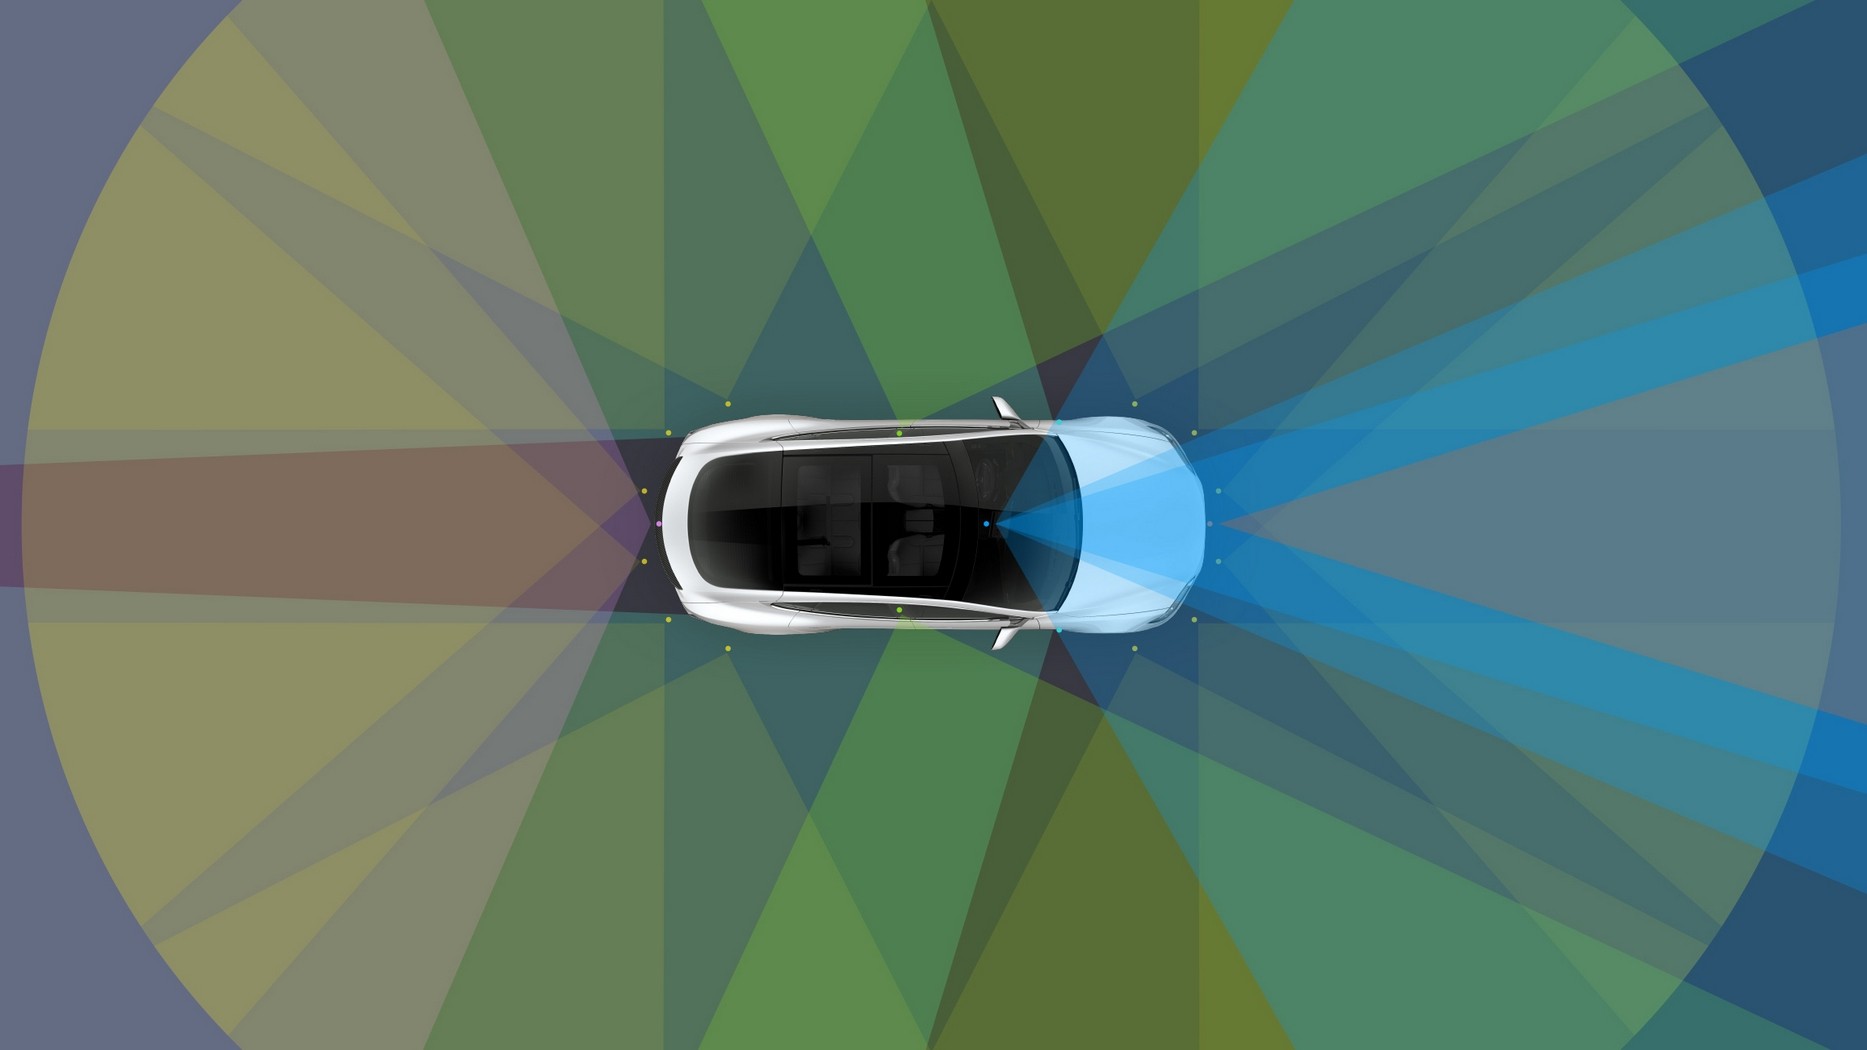 Tesla Set to Debut New High-res Radar Unit in Mid-Jan - A Major Step Forward for Self-Driving Technology